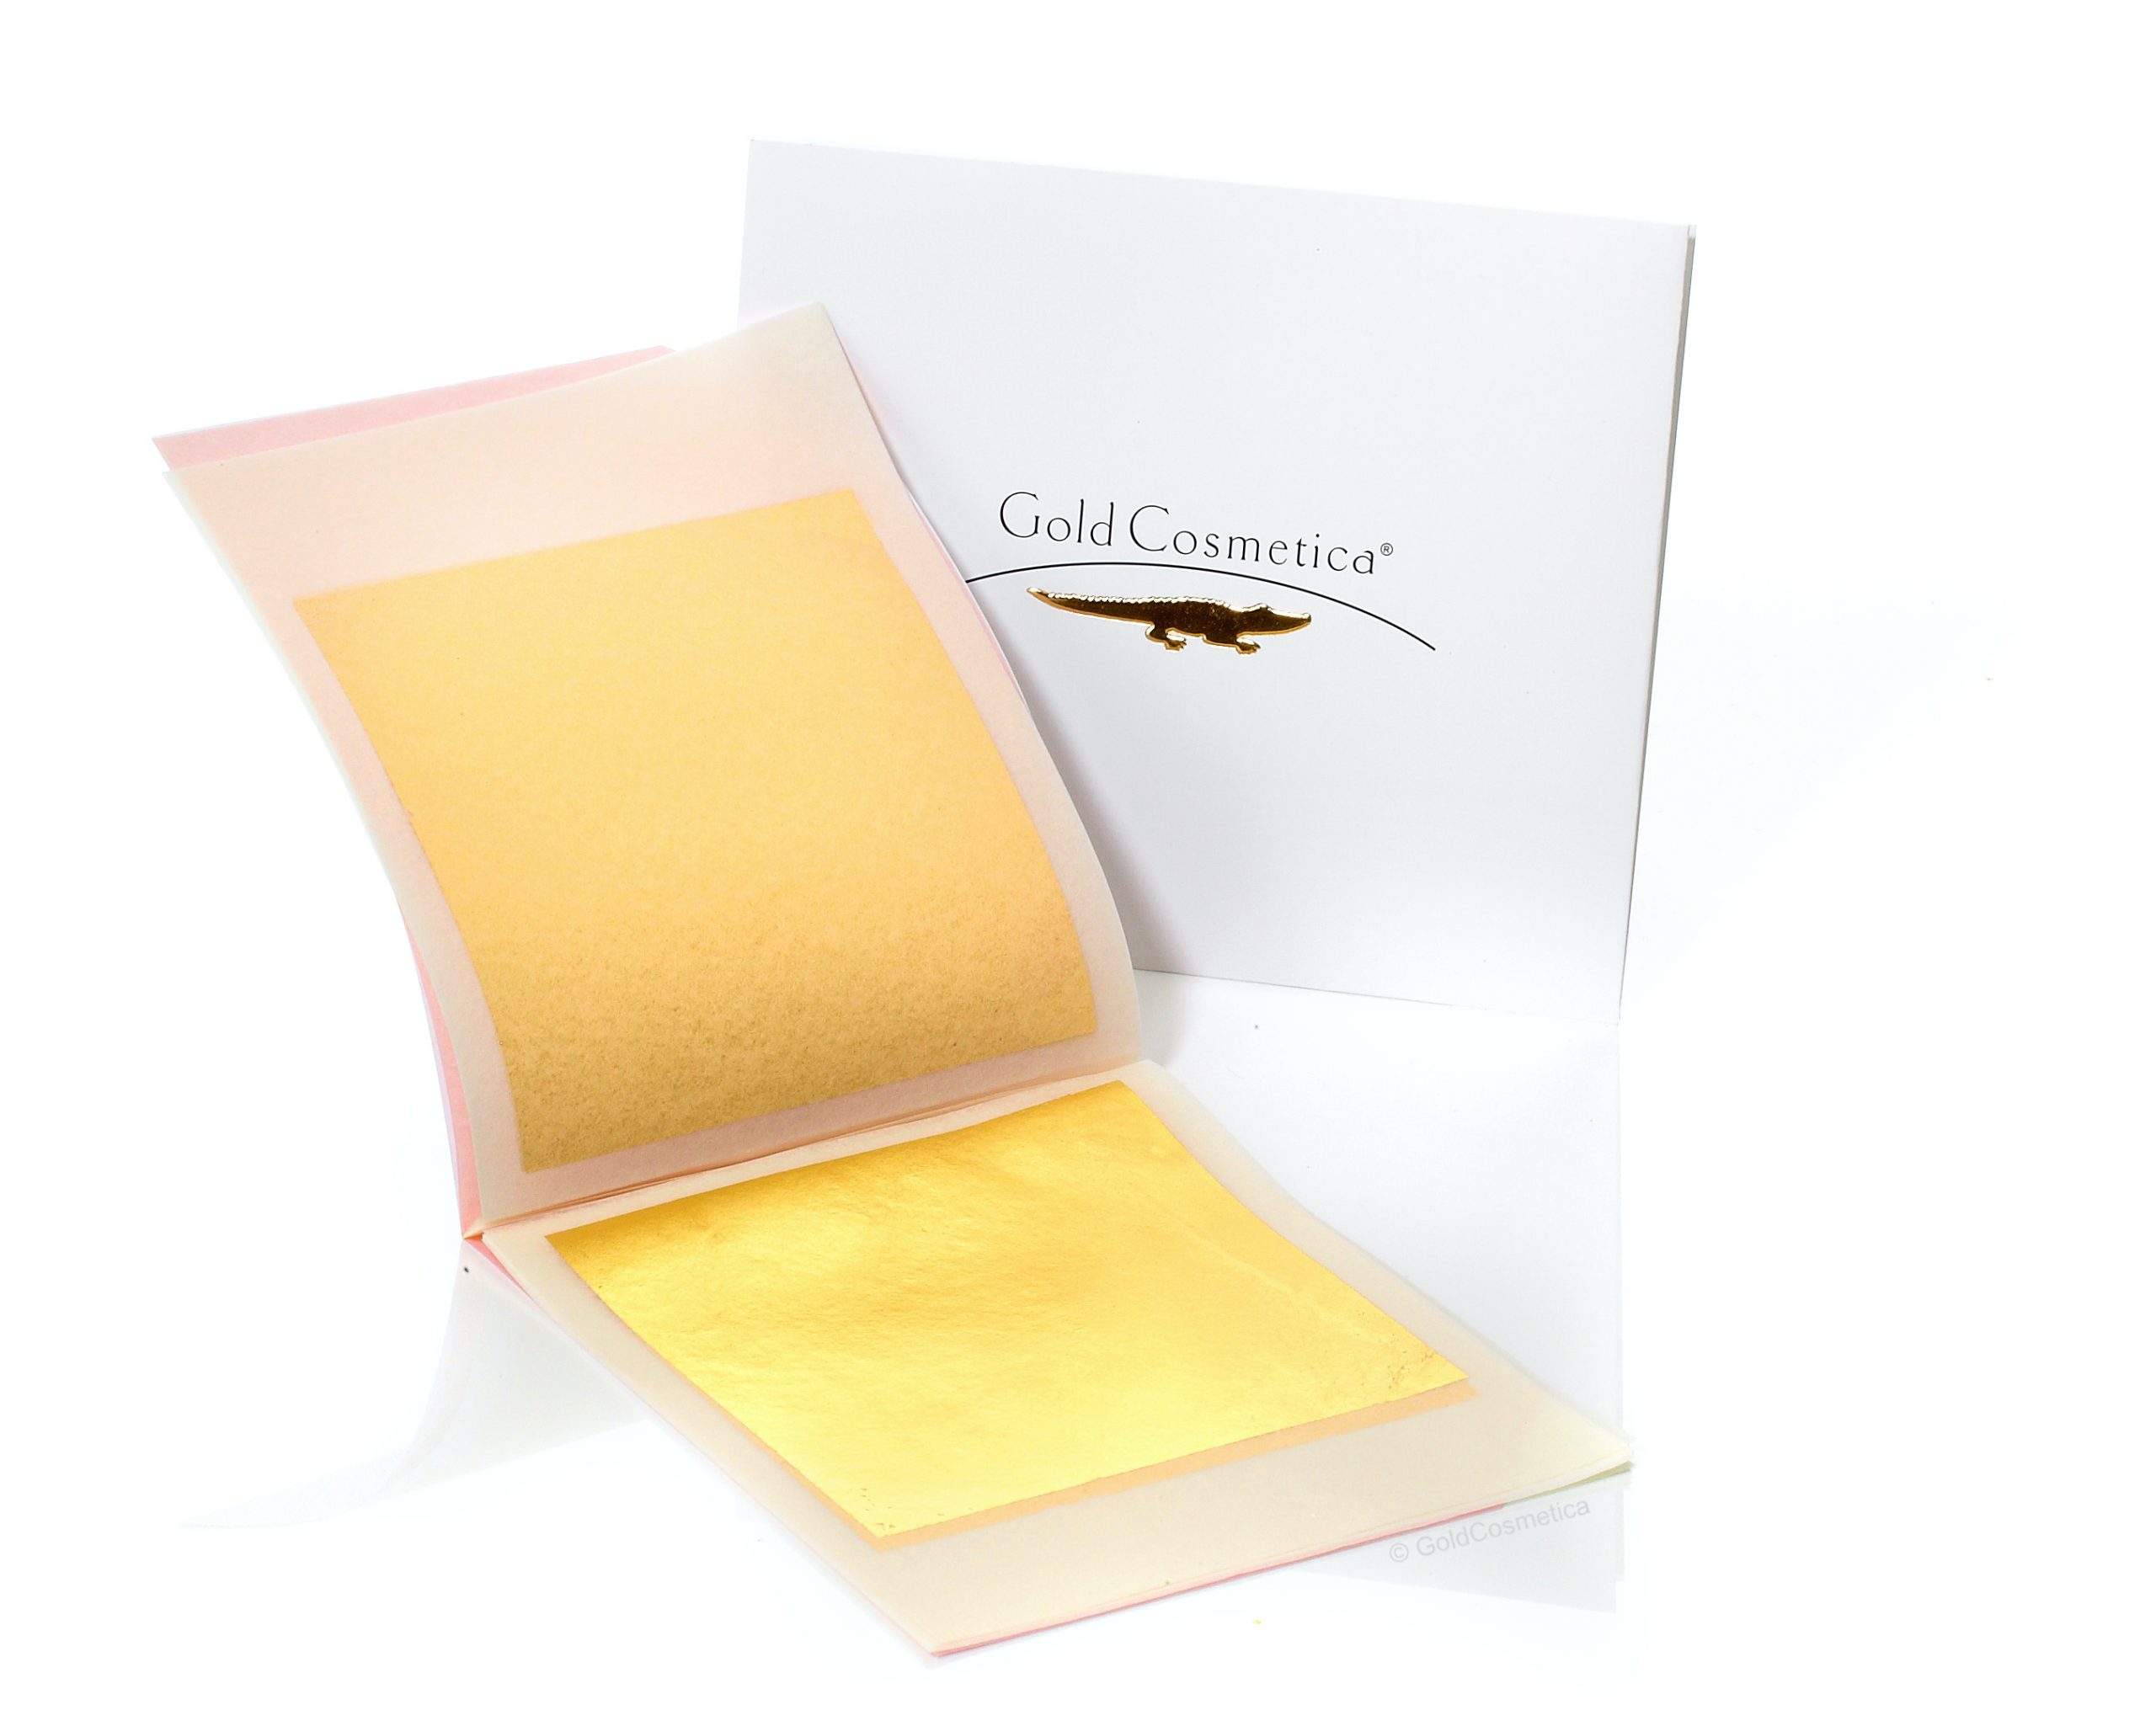 GoldCosmetica Body Treatment Gold 999 (24K) Packaging